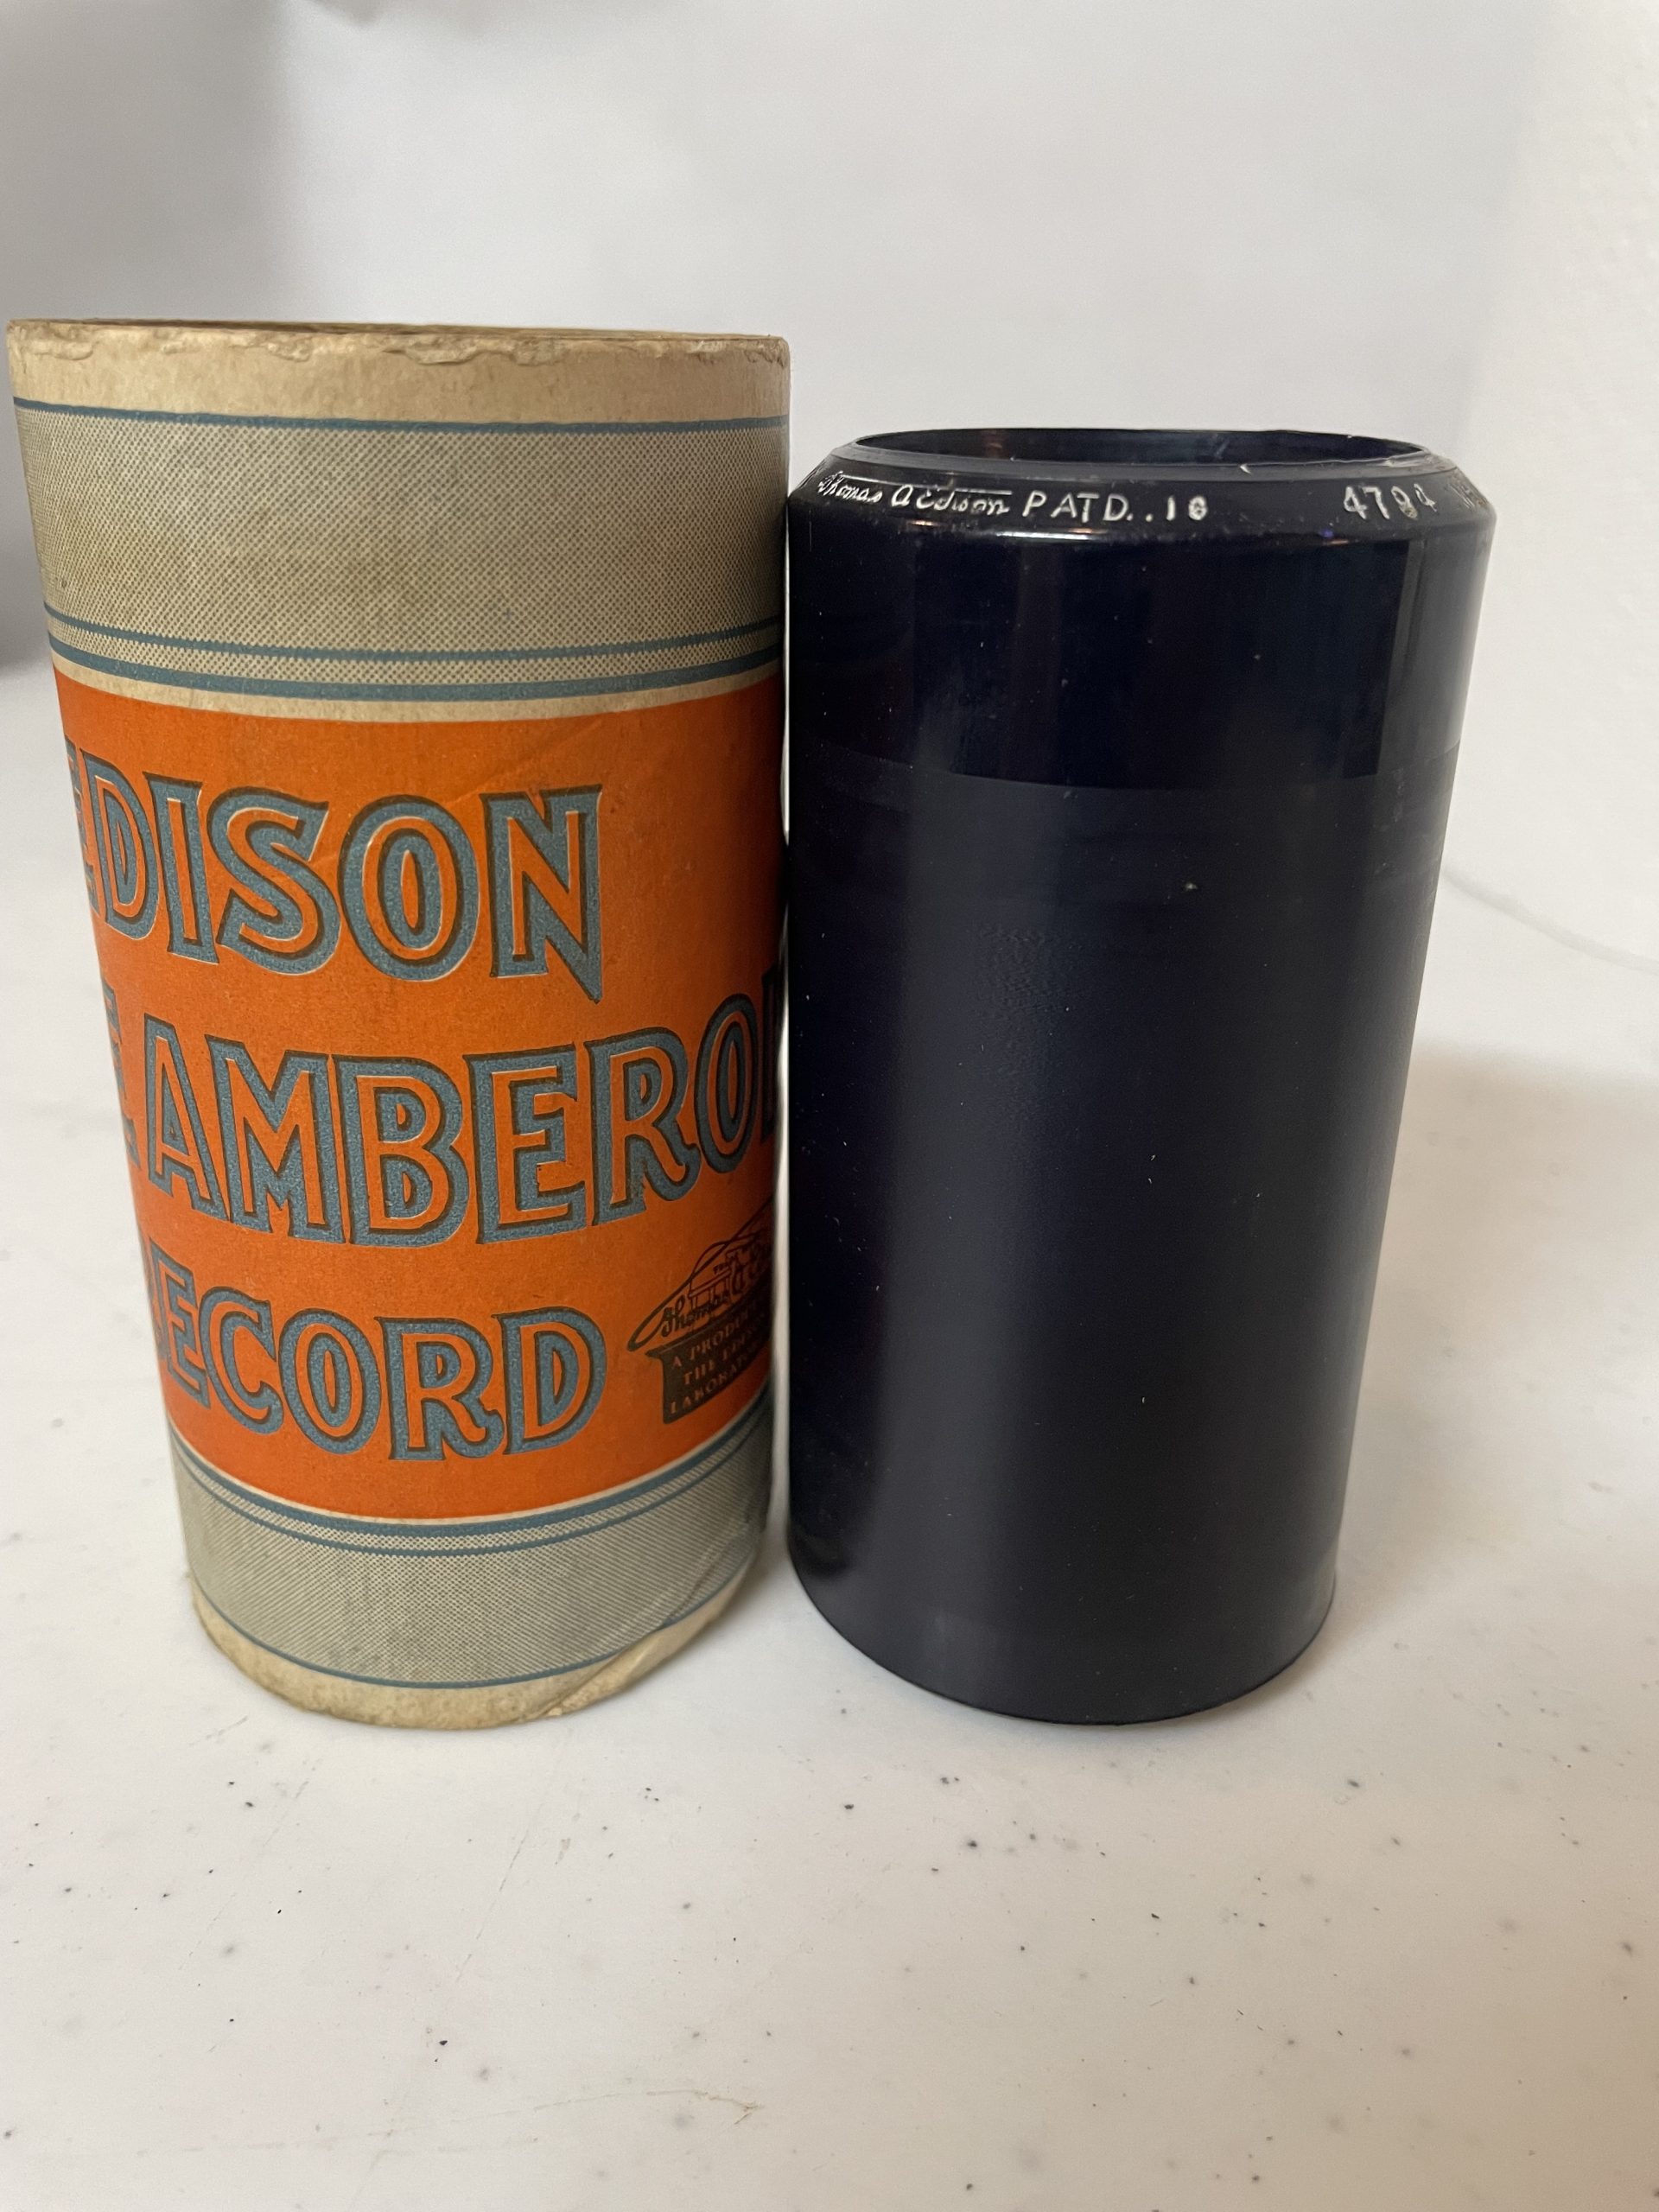 Edison 4 minute Cylinder…”How Long Have You Been Married?”